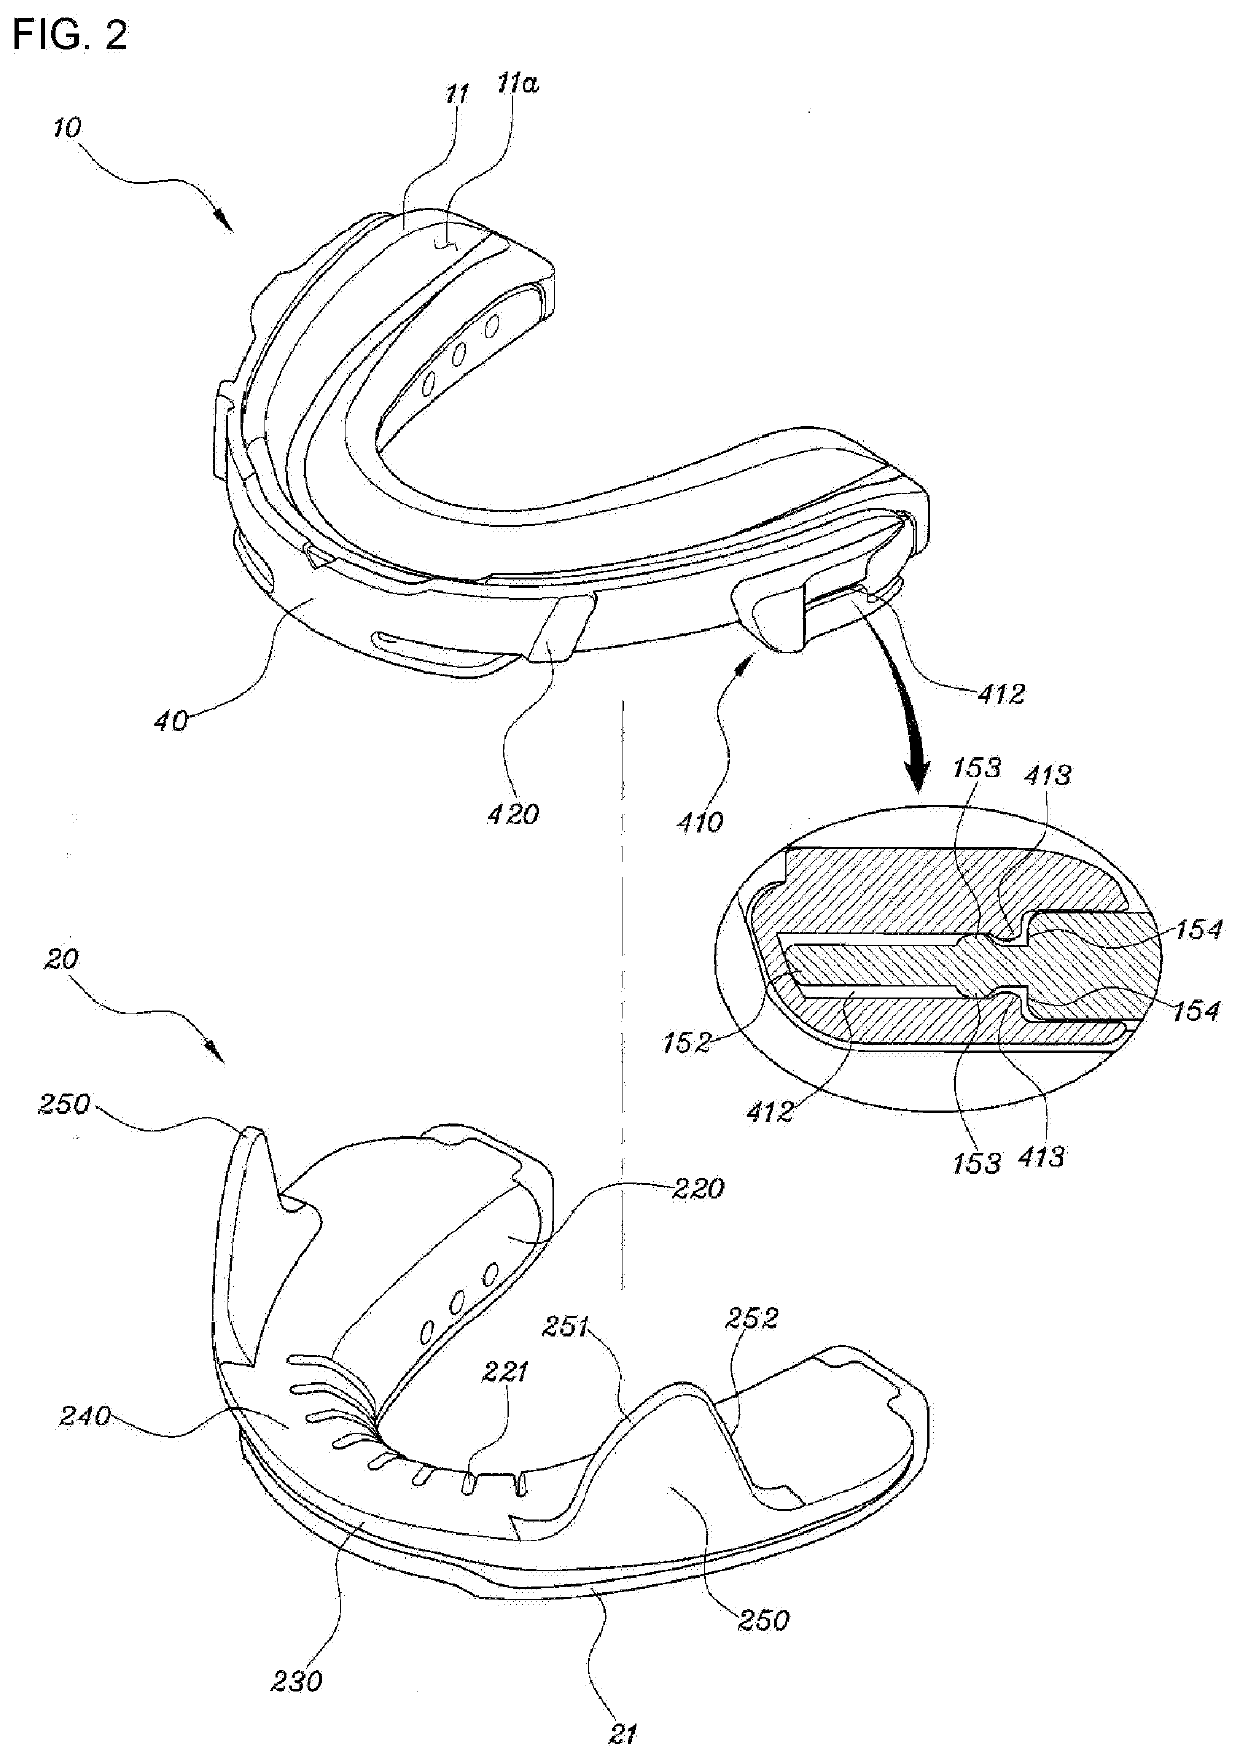 Device for preventing sleep apnea and snoring